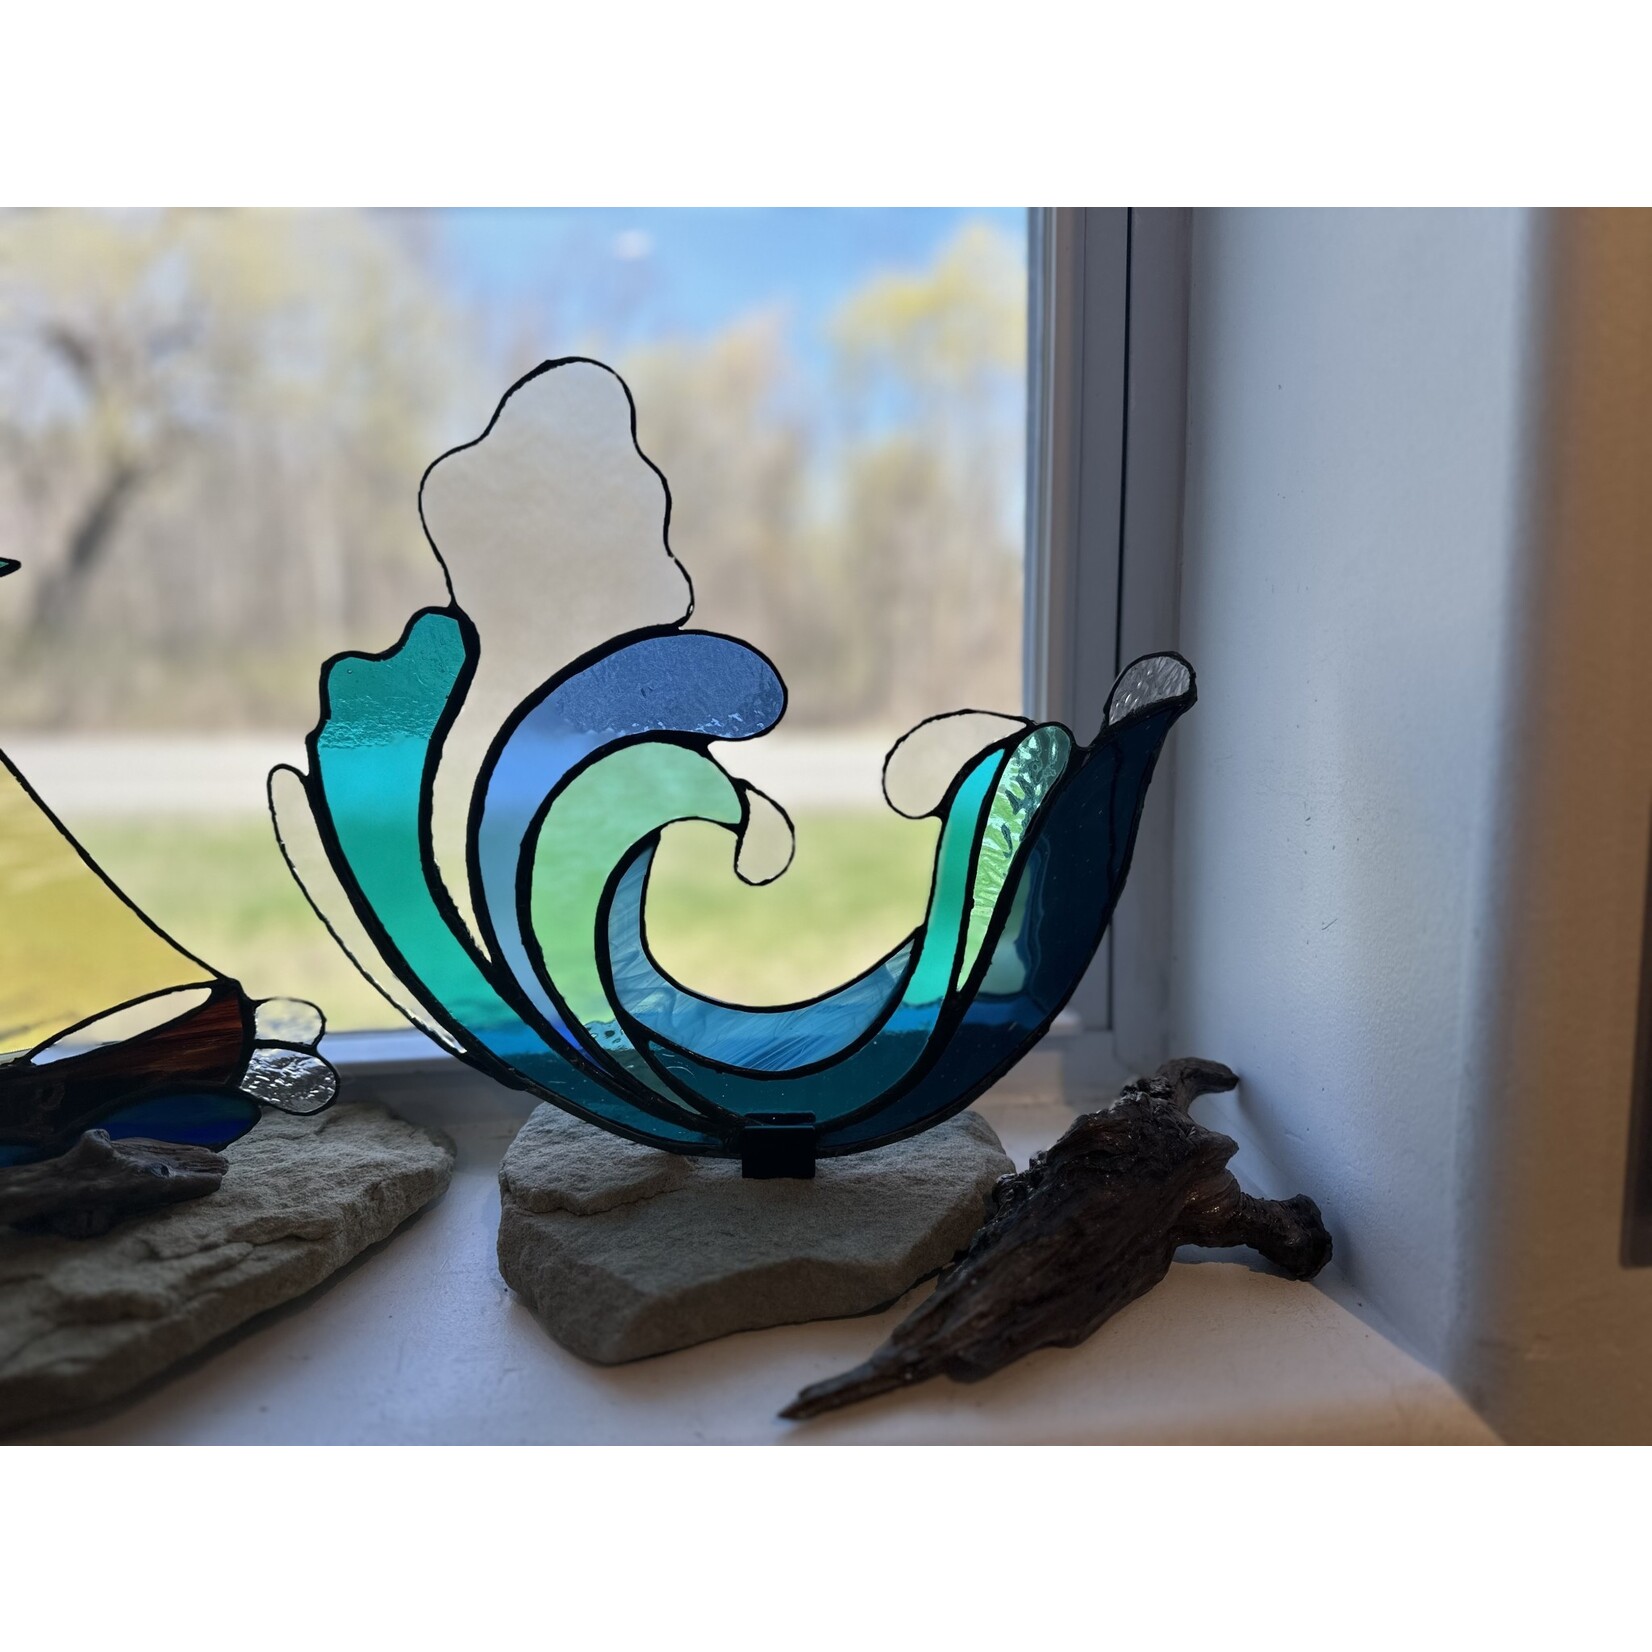 Stained Glass on Stone - "Wave"